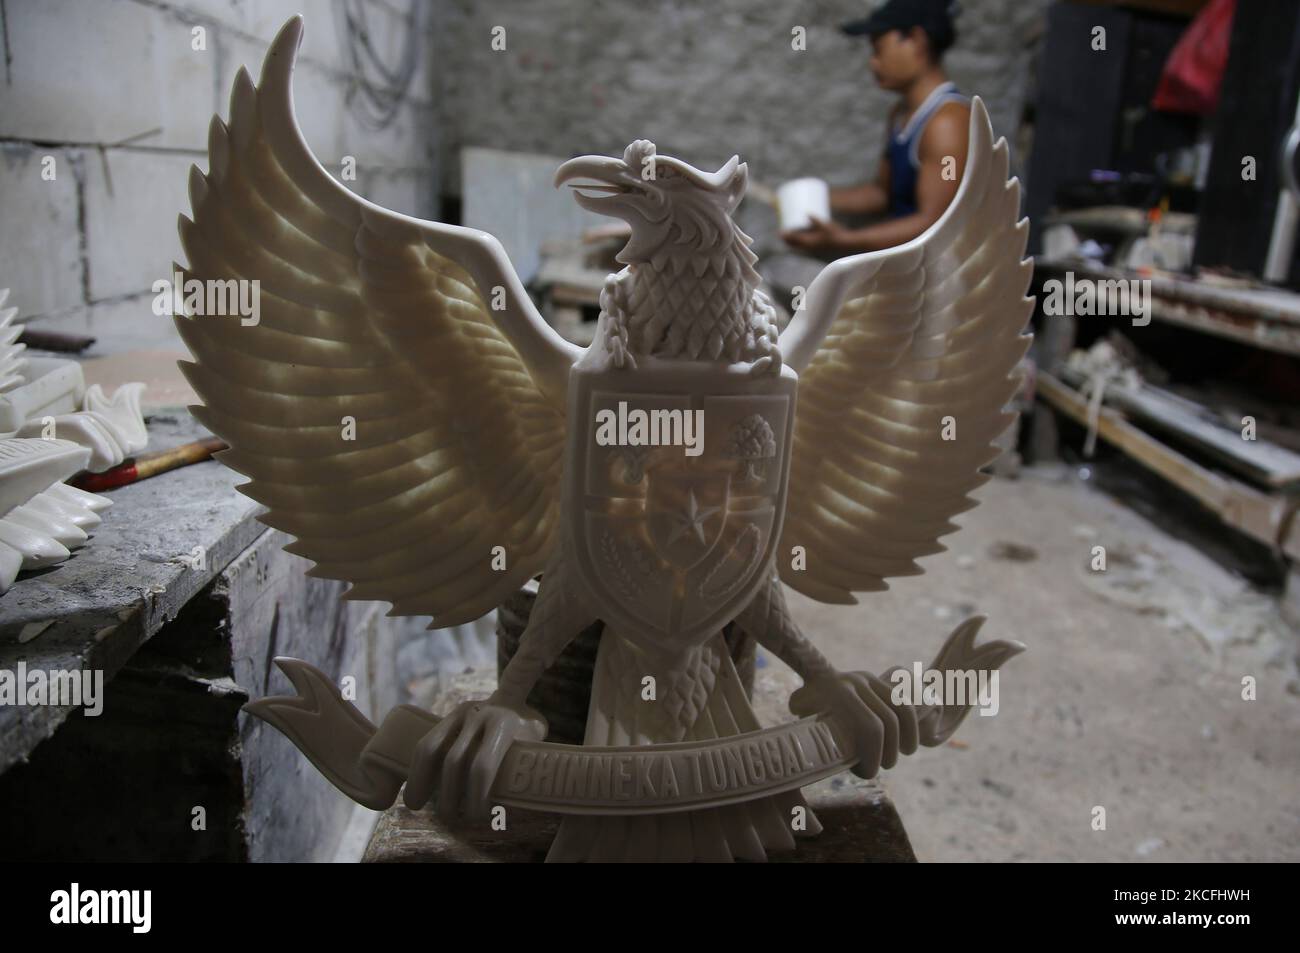 Craftsmen make a statue of Garuda Pancasila as the symbol of the state in a home industry in the Greater Bali area, Kalimalang, East Jakarta, On JUNE, 2, 2021. This business has revived during the Covid-19 pandemic as orders from various national symbols arrived from a number of regions from inside and outside Indonesia to be used as office and school wall decorations. (Photo by Dasril Roszandi/NurPhoto) Stock Photo